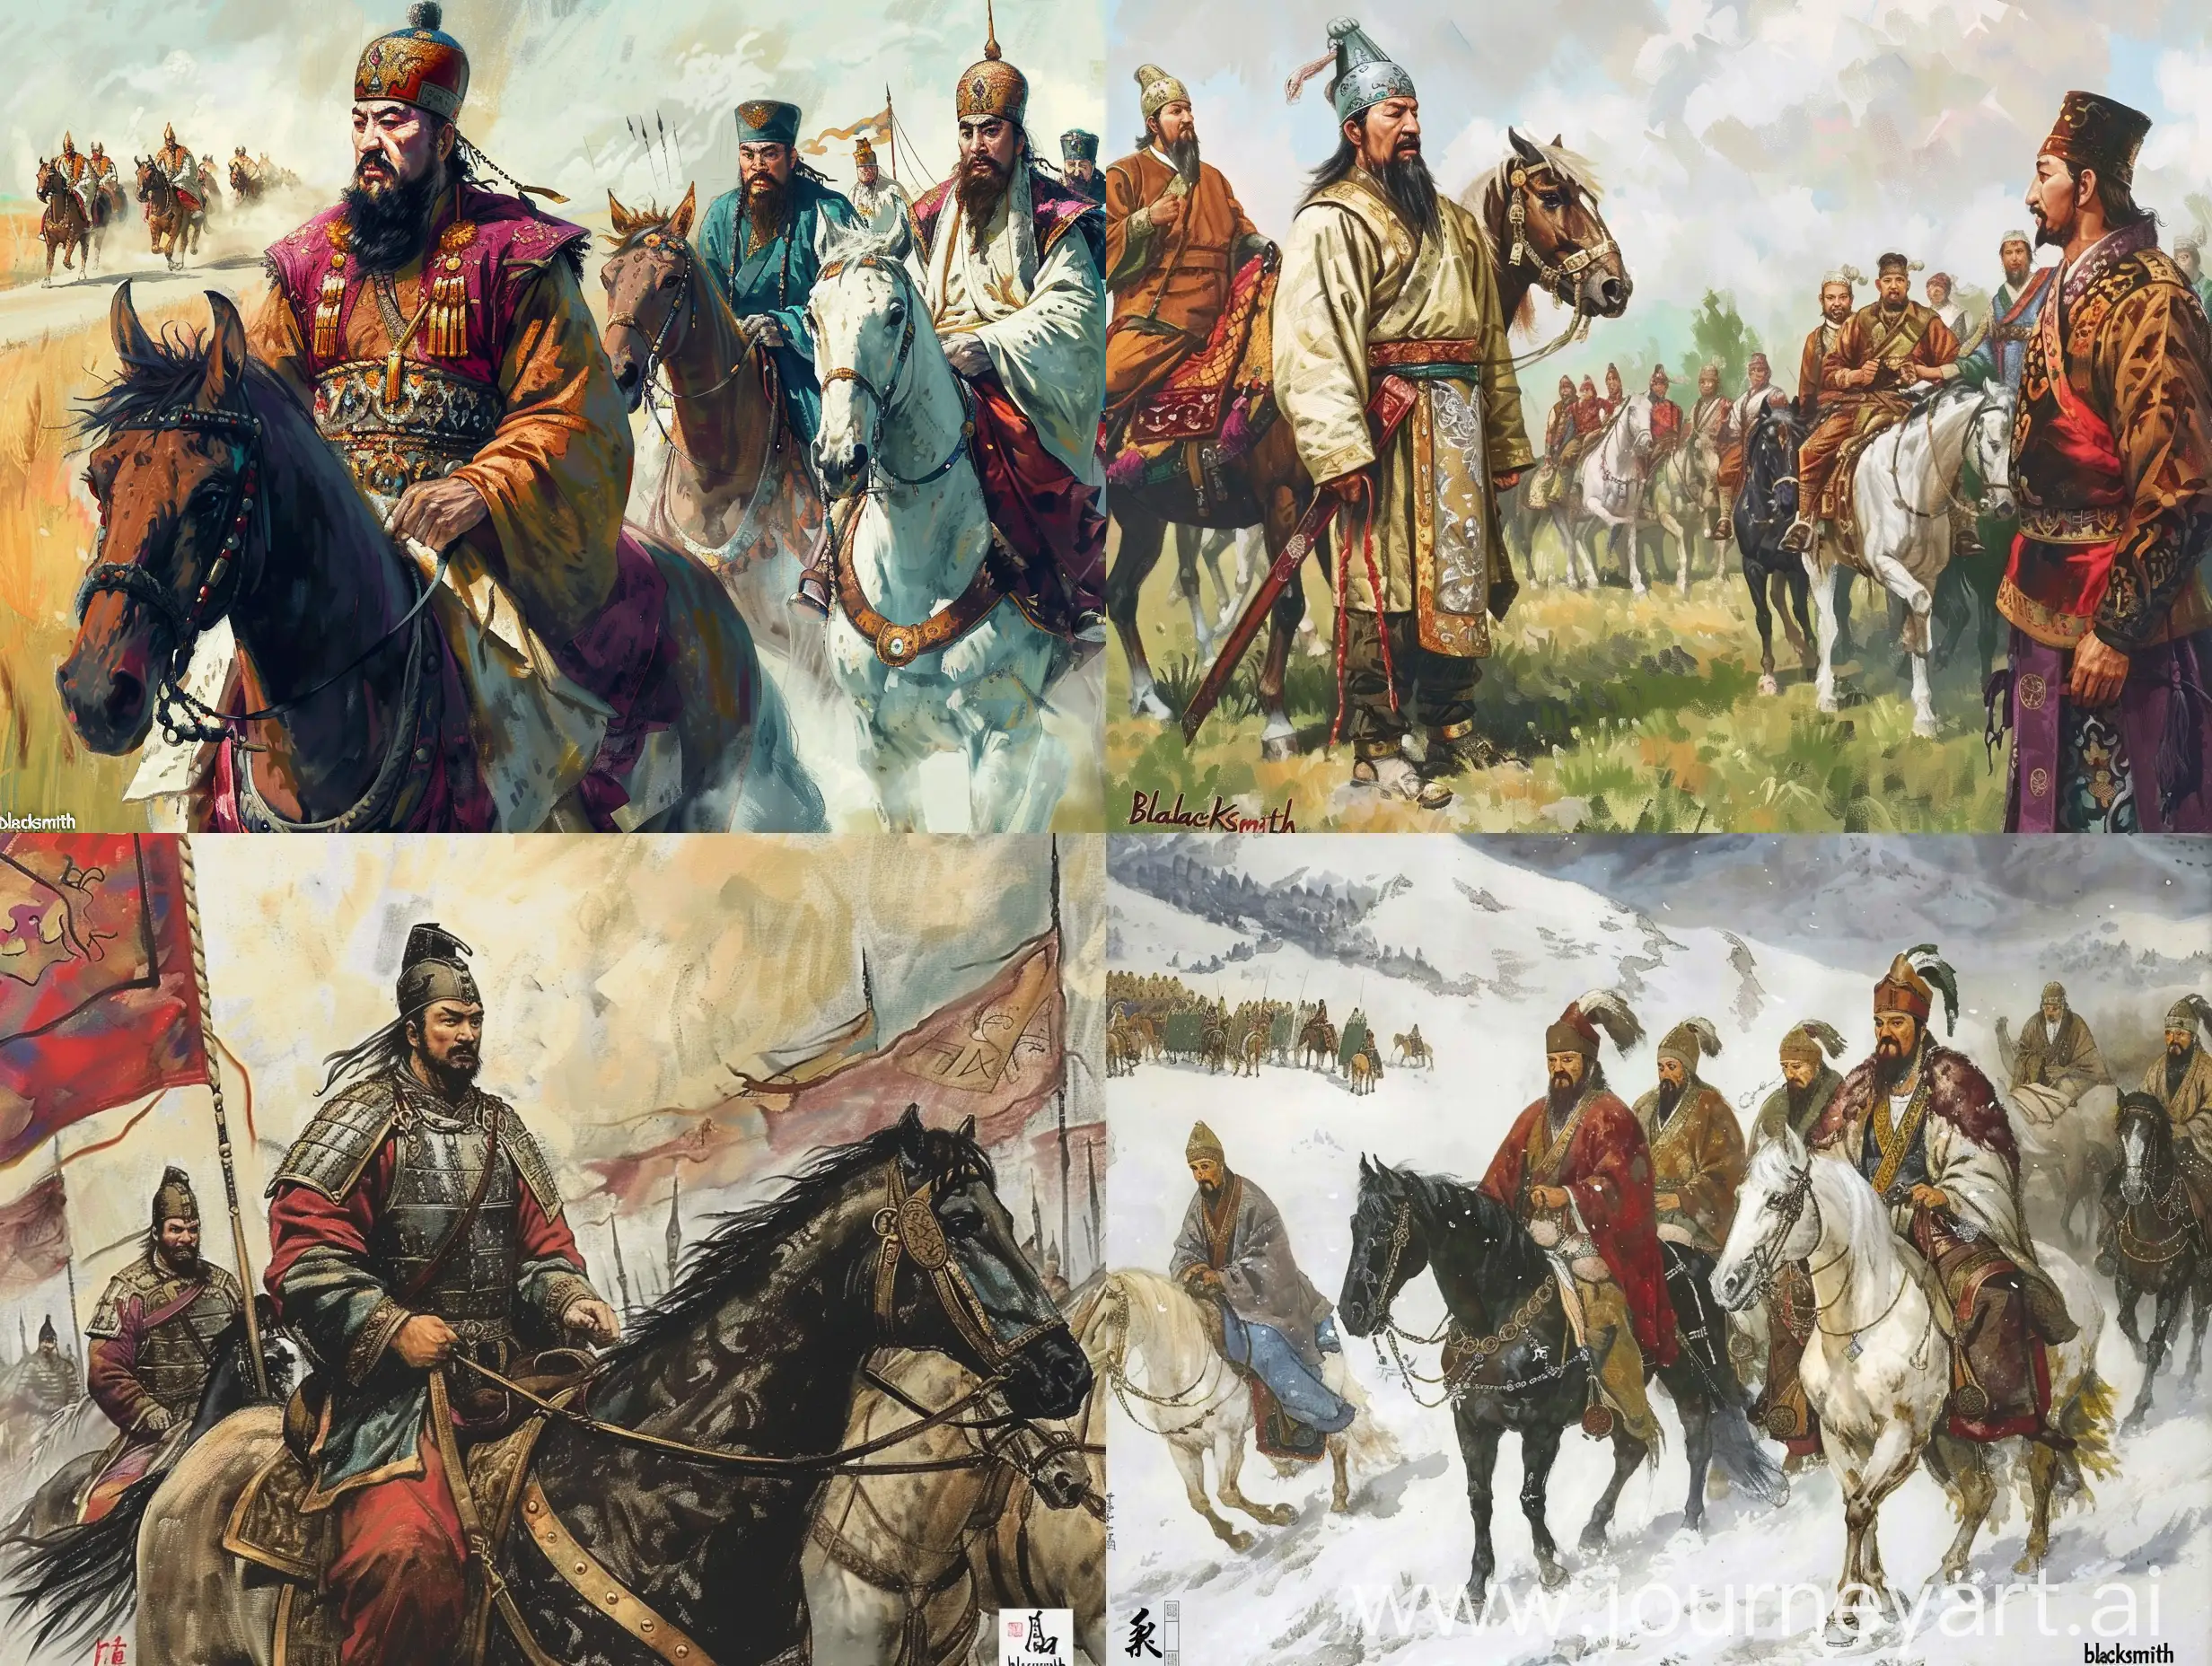 Diplomatic-Exchange-and-Tribal-Rebellion-Bumins-Turkic-Dynasty-Emergence